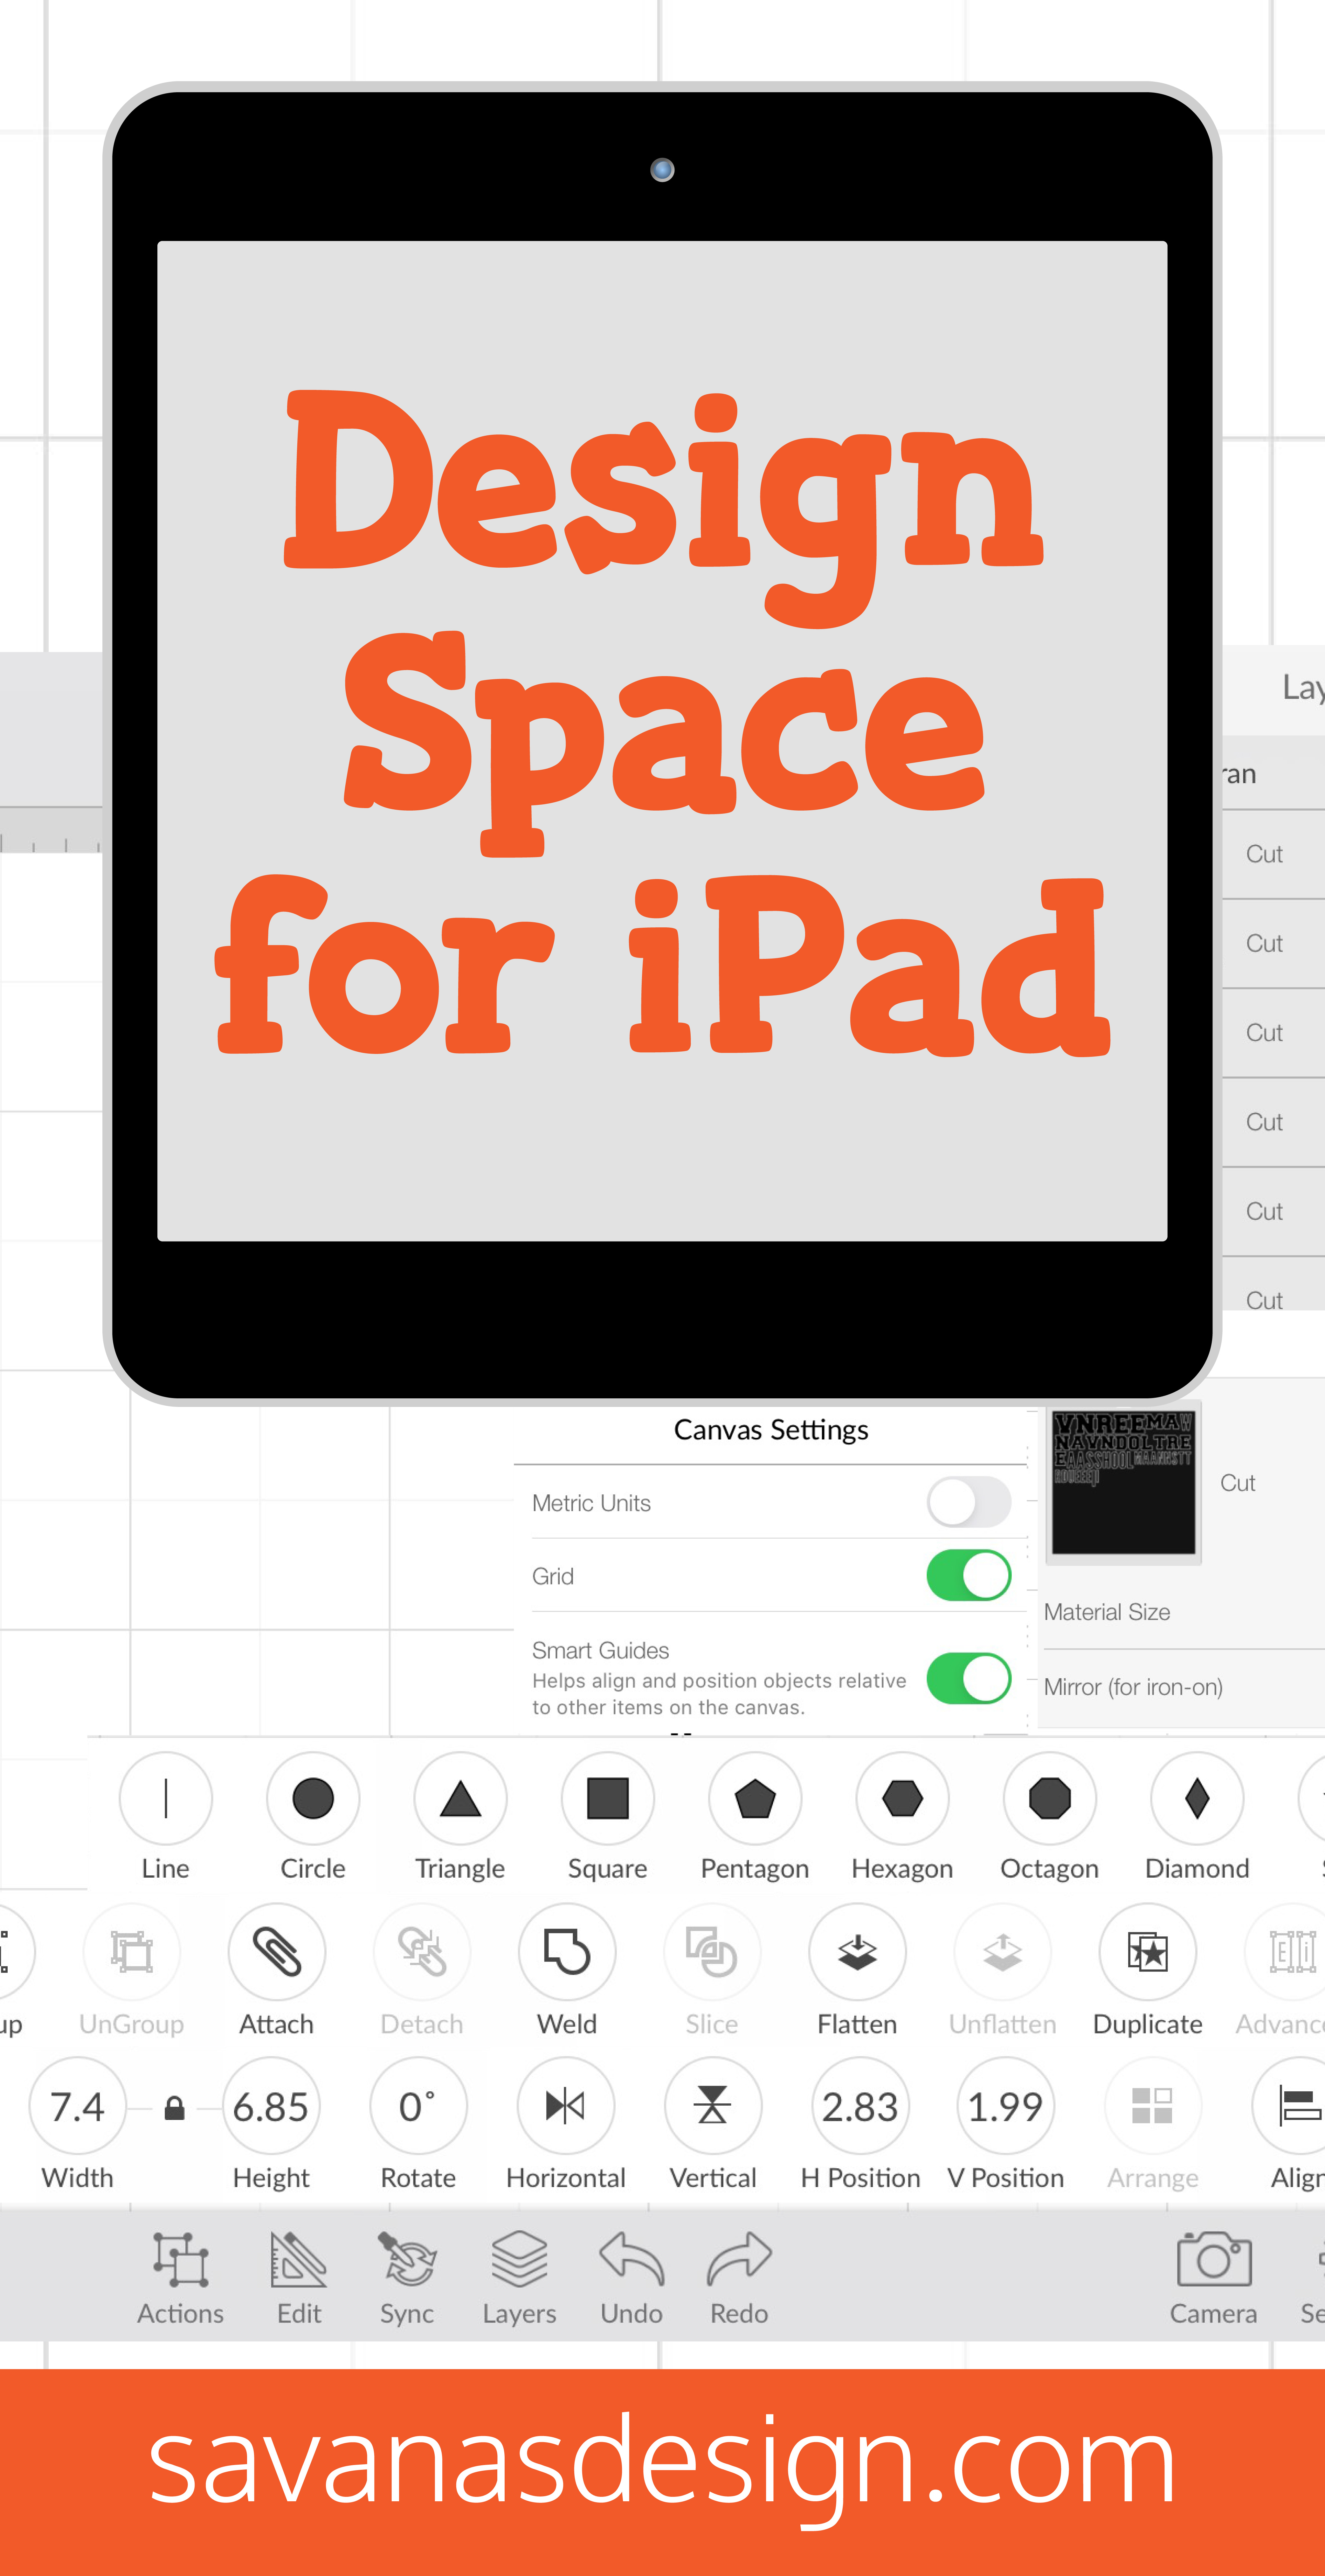 Design Space for iPad Share on Pinterest